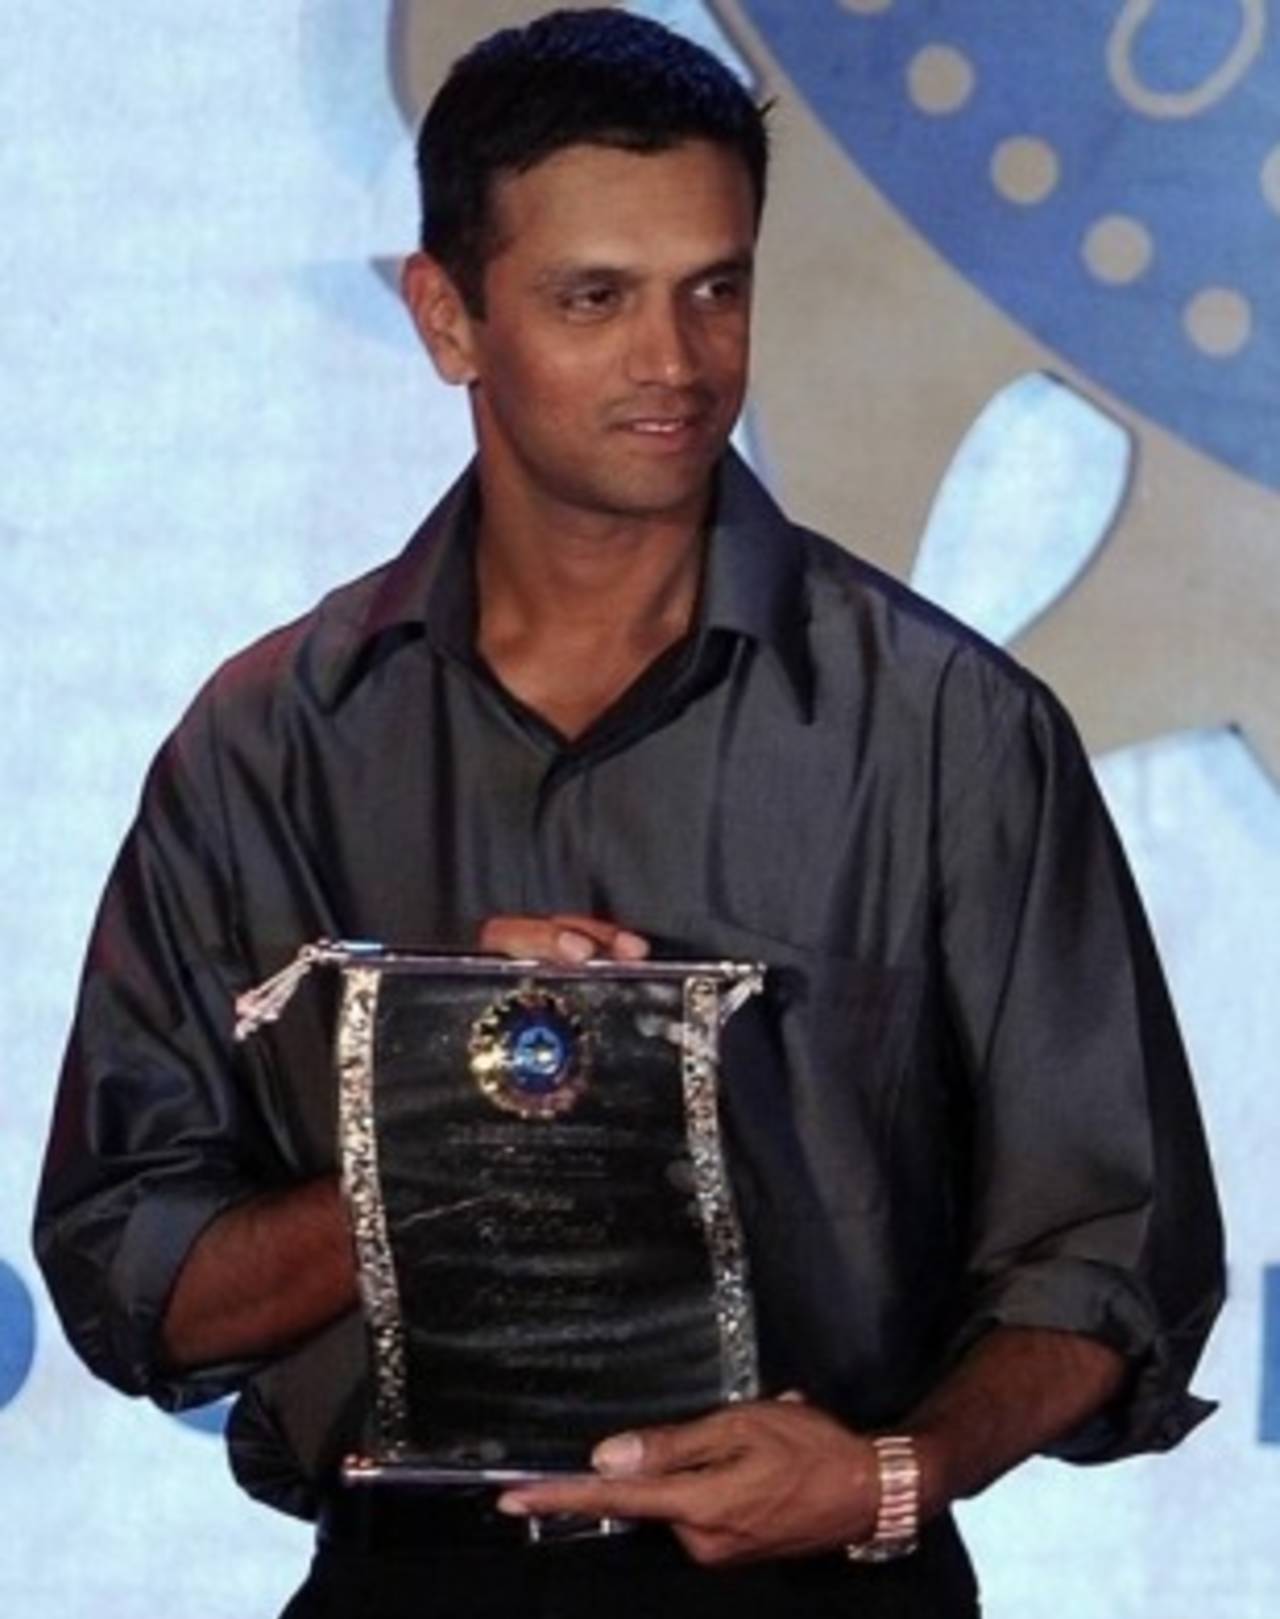 Rahul Dravid counseled all administrators to look at why crowds had recently fallen even in India, and to ask themselves how the erosion of support for the game would hurt everyone&nbsp;&nbsp;&bull;&nbsp;&nbsp;AFP